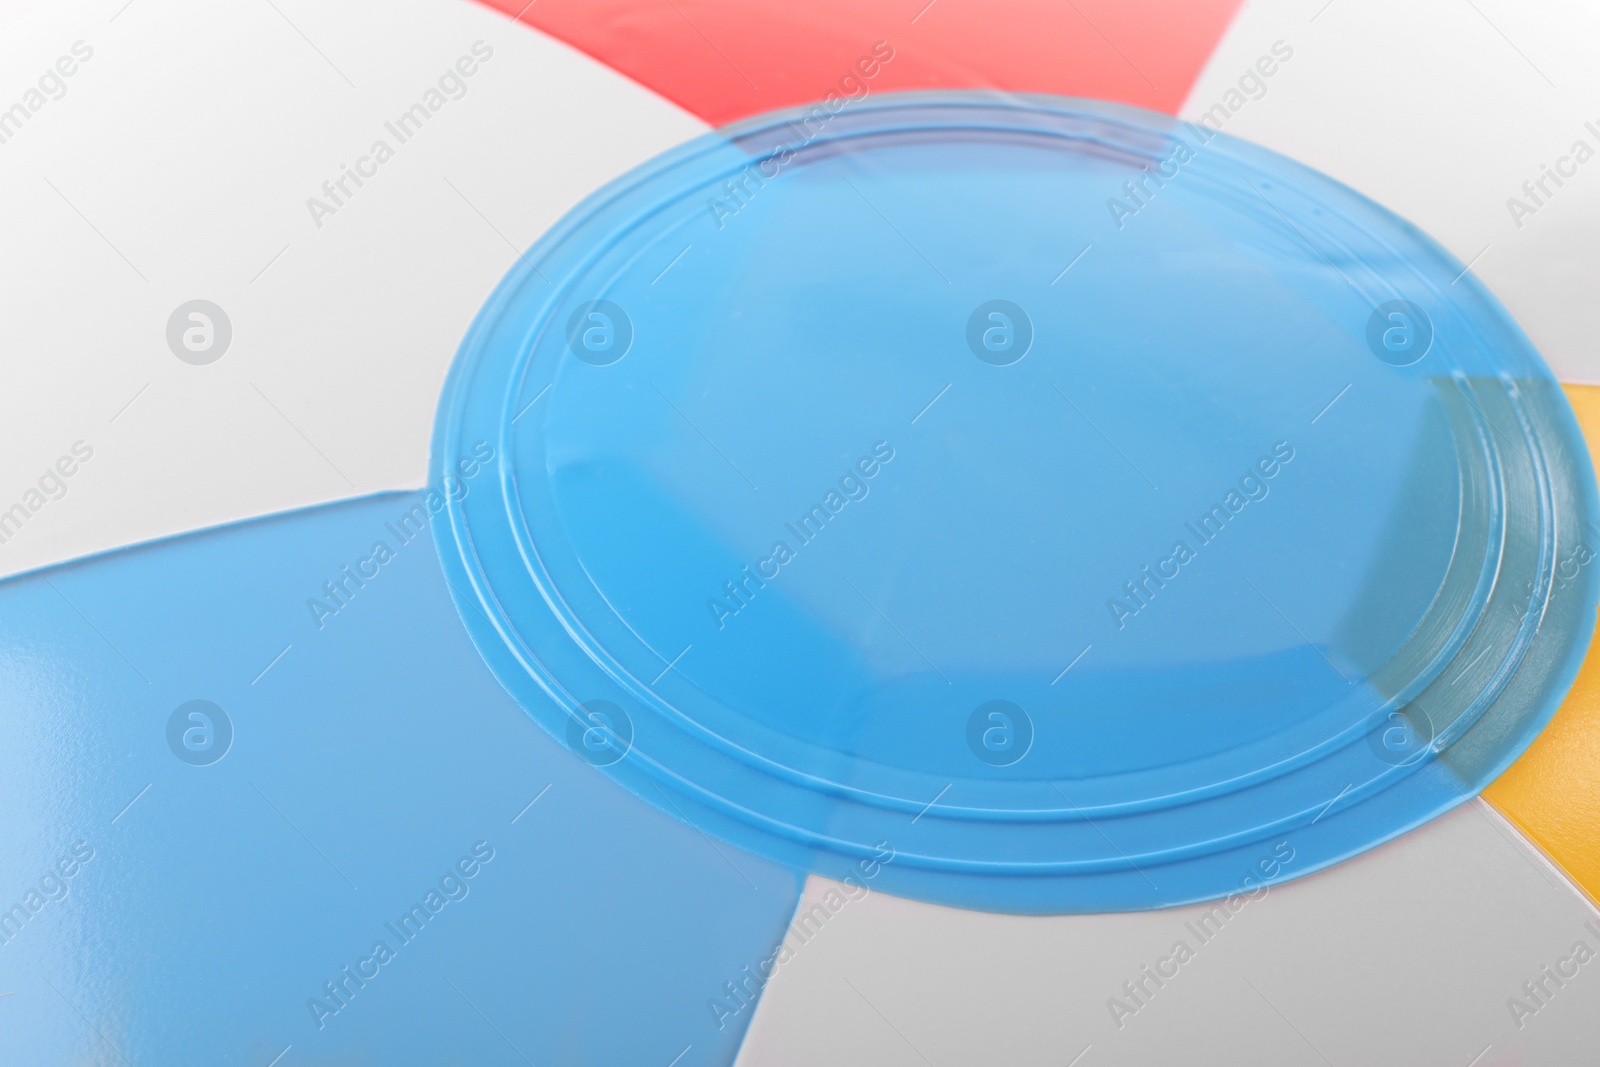 Photo of Colorful inflatable ball as background, closeup view